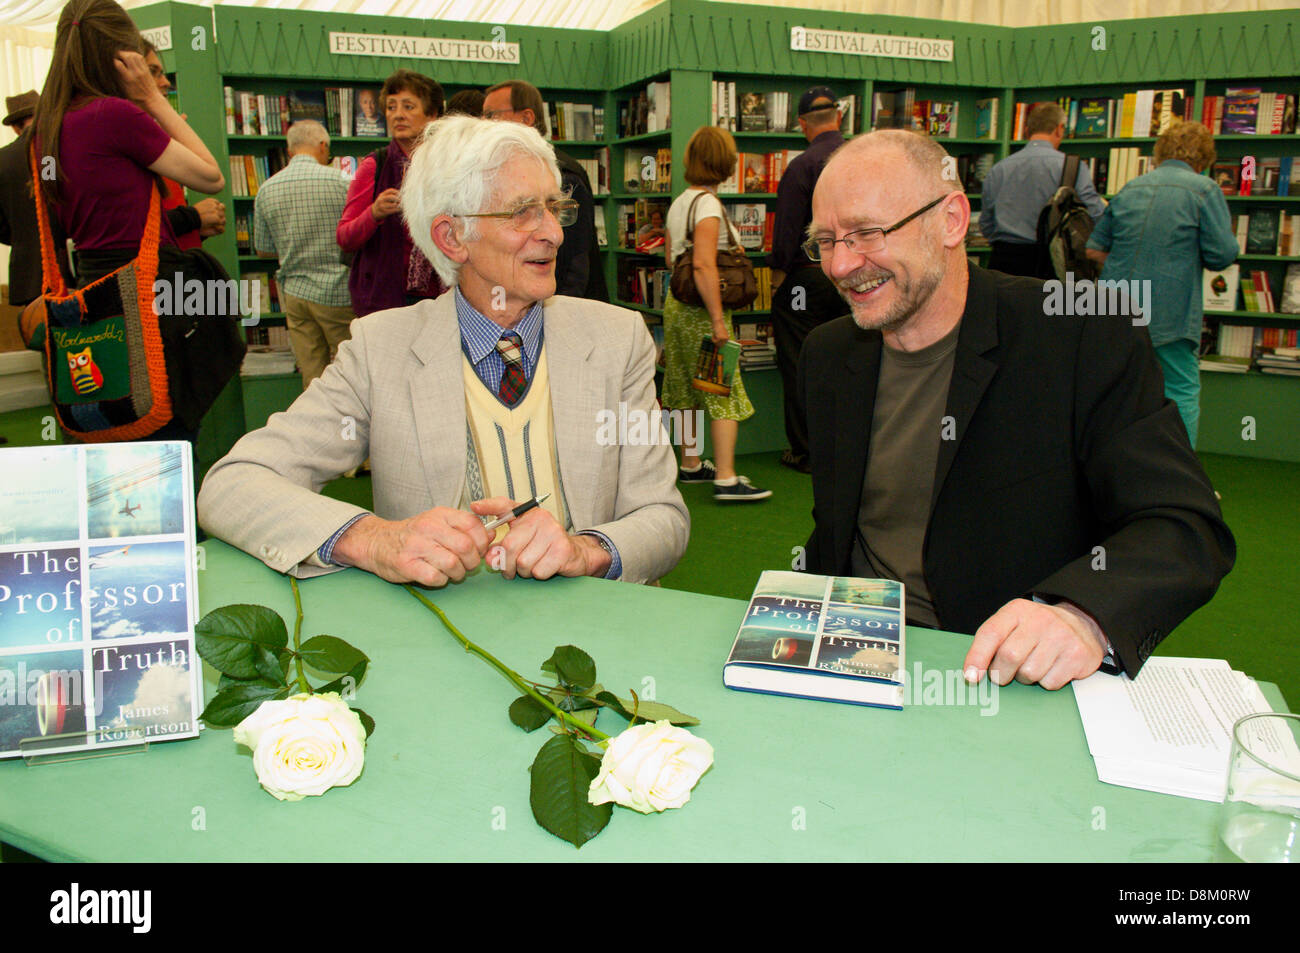 Hay-on-Wye, UK. 31st May 2013. Twenty five years after The Lockerbie Pan Am Flight 103 disaster novelist James Robertson, (R) author of The Professor Of Truth, and a member of the Justice For Megrahi Group – whose daughter was killed on the flight – are seen at the Hay Book Shop at The Hay Festival. Photo Credit: Graham M. Lawrence/Alamy Live News. Stock Photo